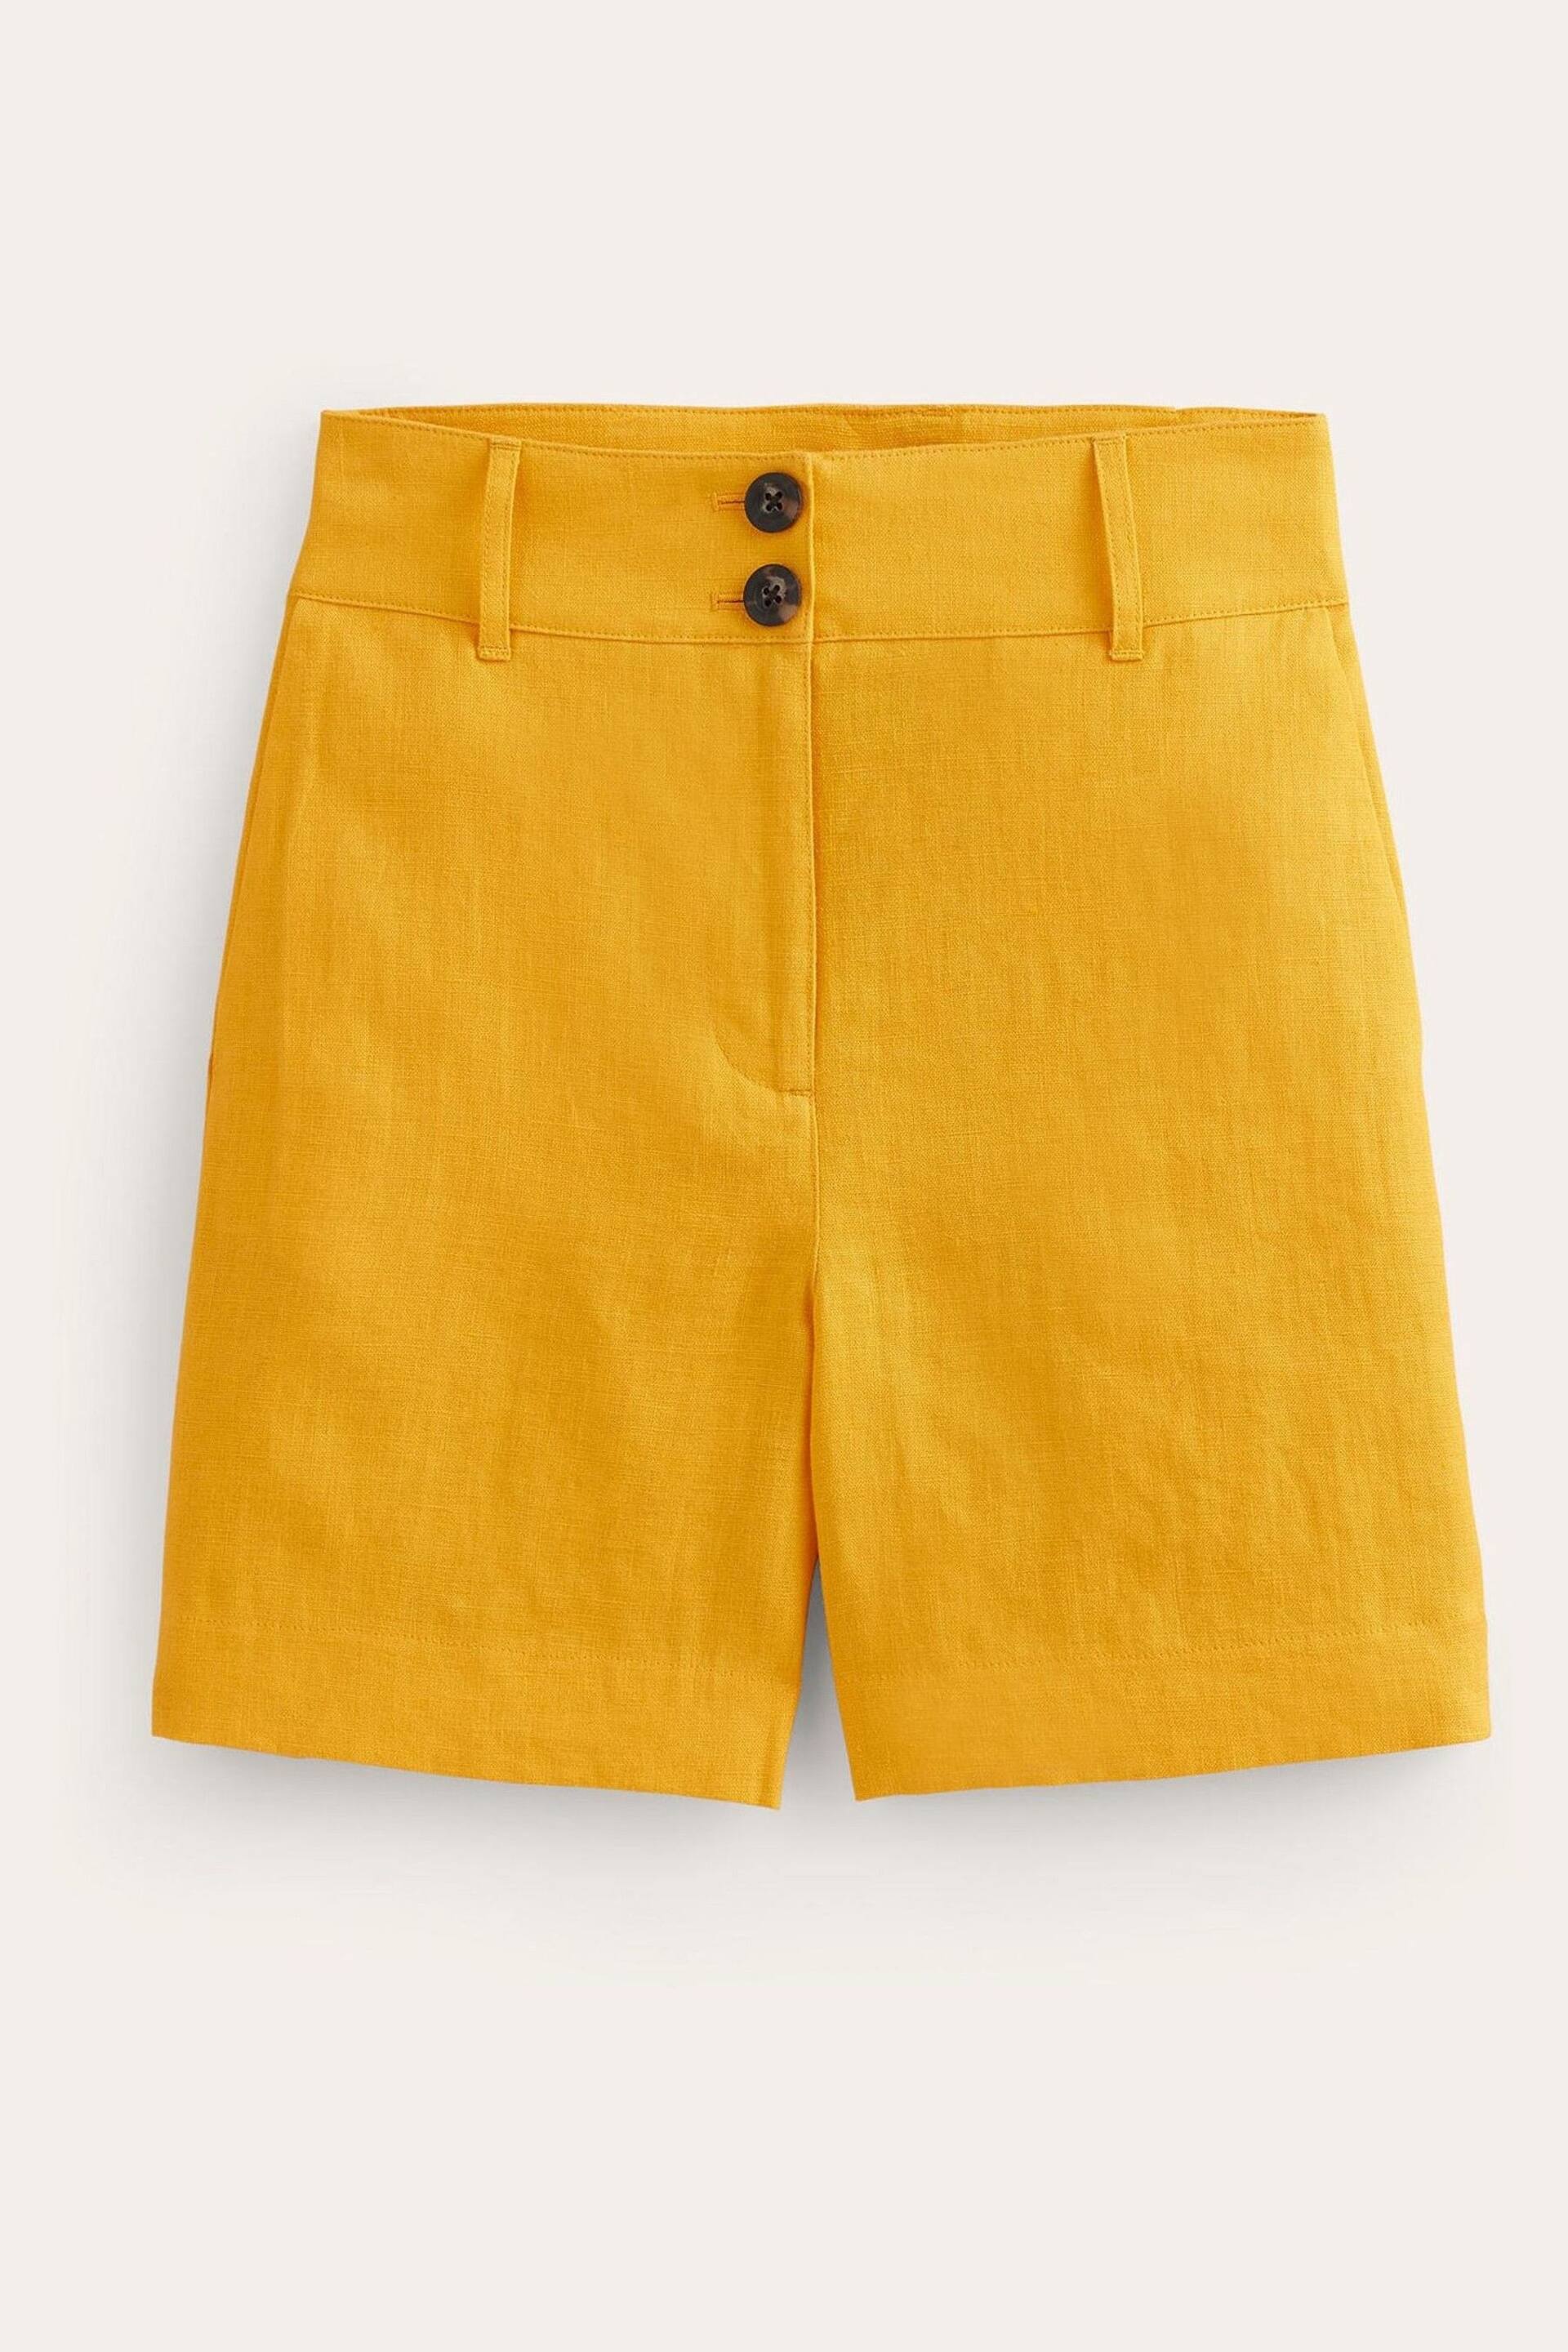 Boden Yellow Westbourne Linen Shorts - Image 6 of 6